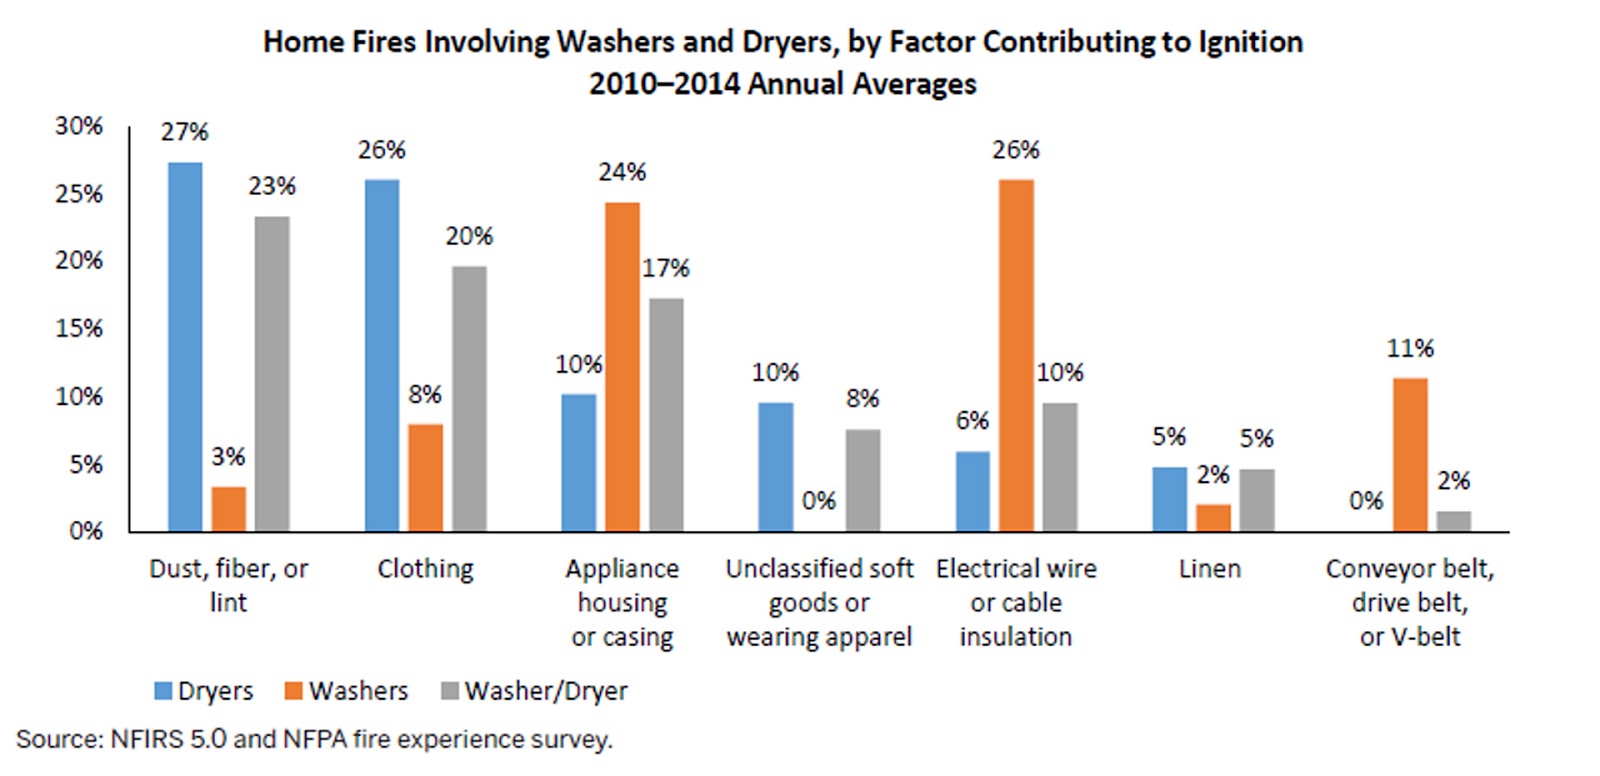 Home fires involving washers and dryers